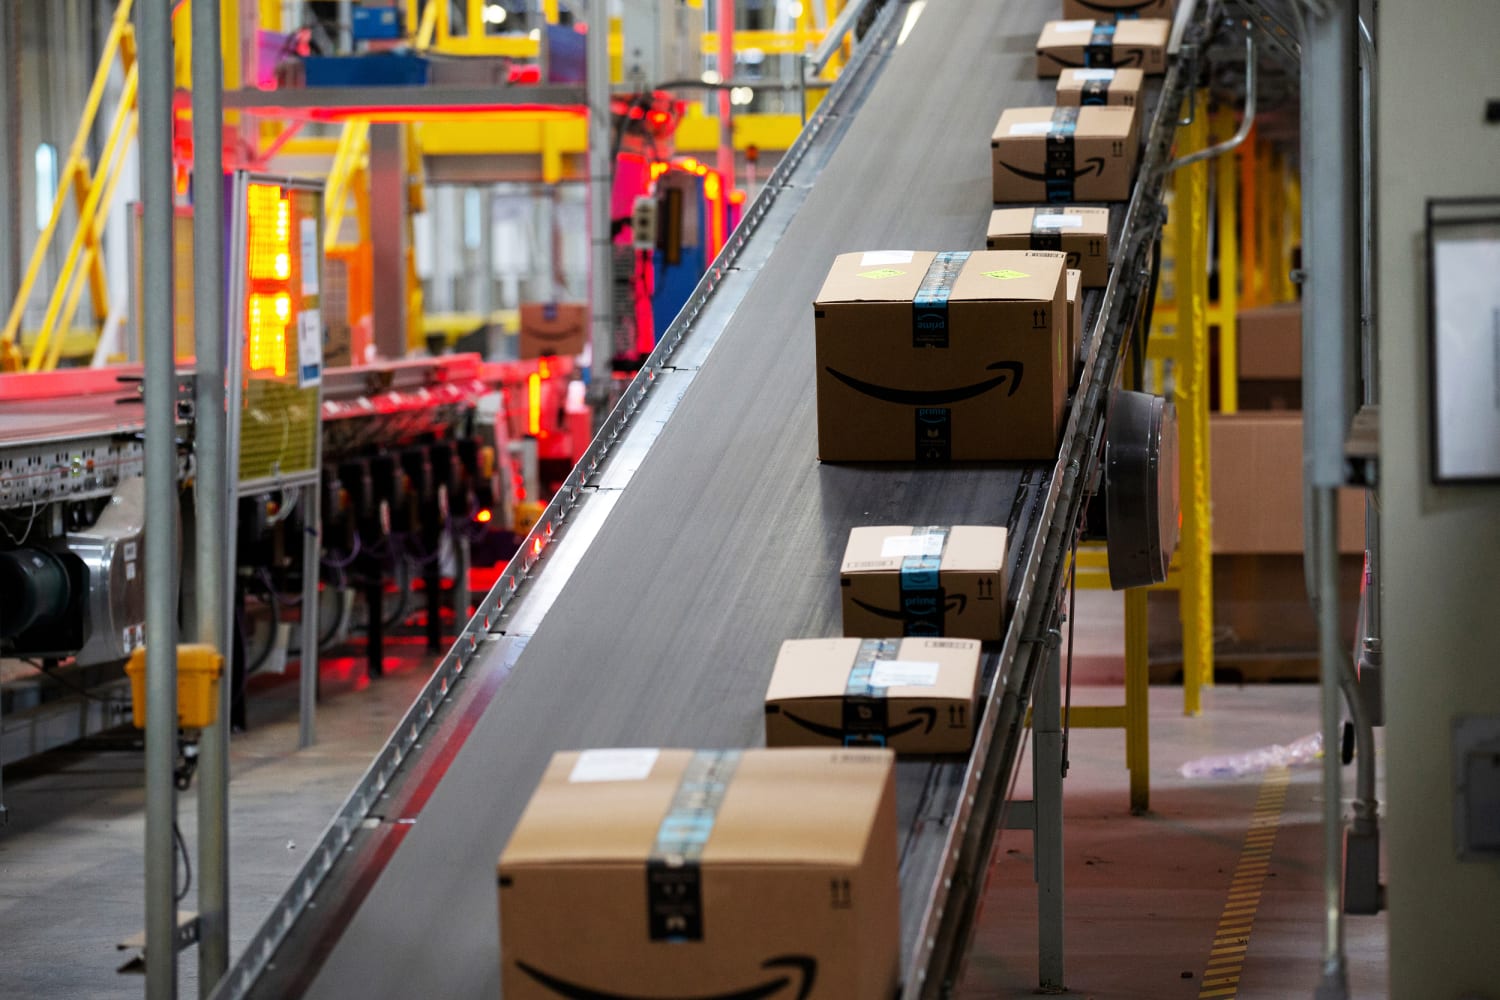 18 Does Amazon Drug Test Its Employees And Job Applicants? Ultimate Guide